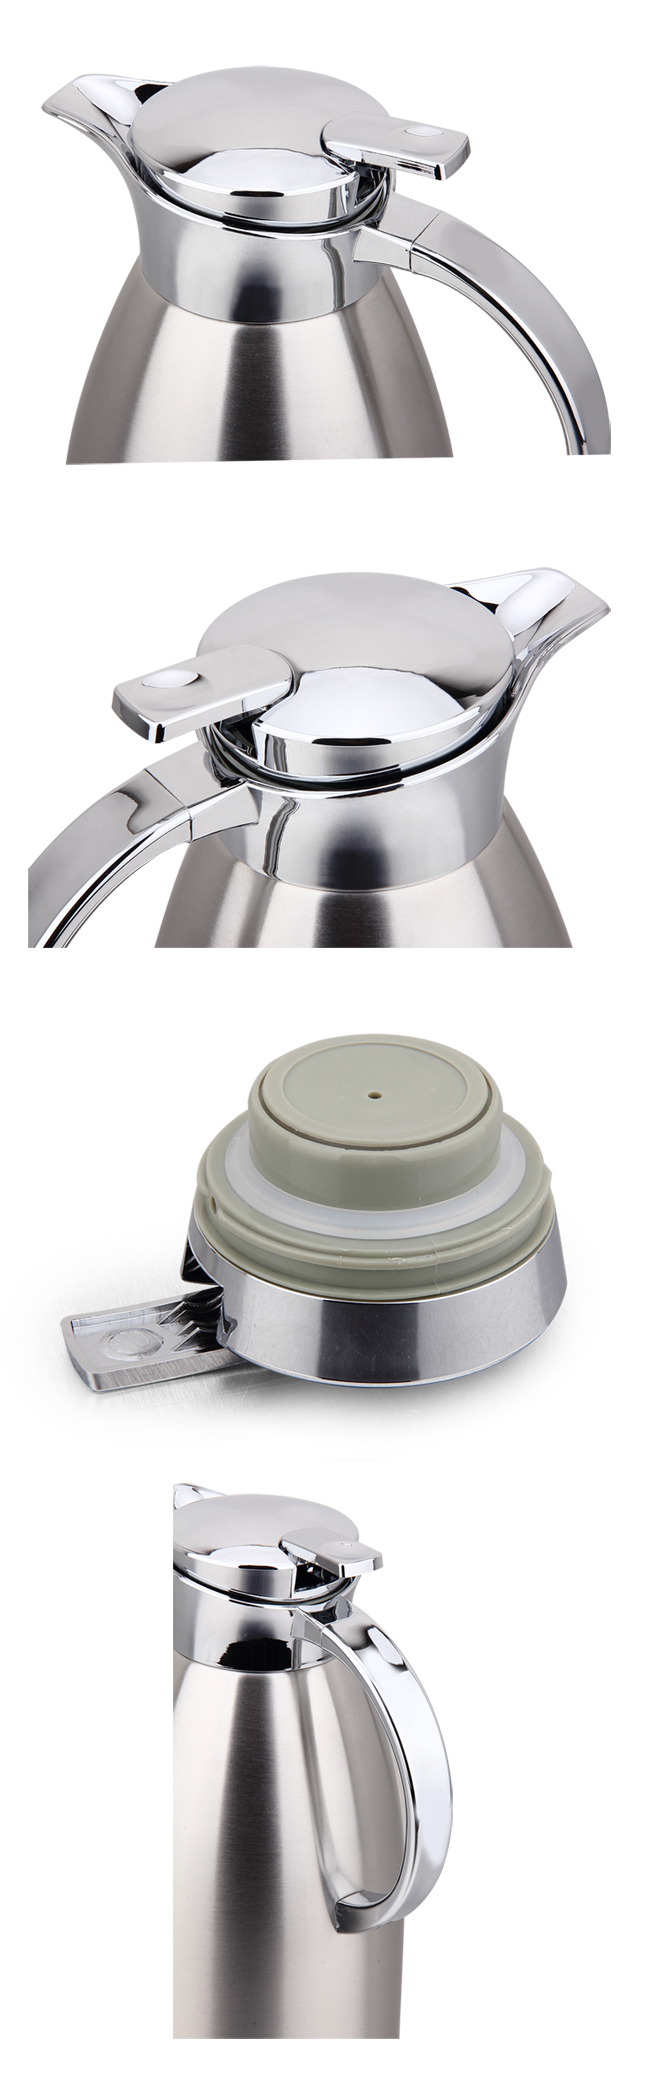 Poplular Stainless Steel Coffee Pot and Vacuum Kettle with Plastic Lid